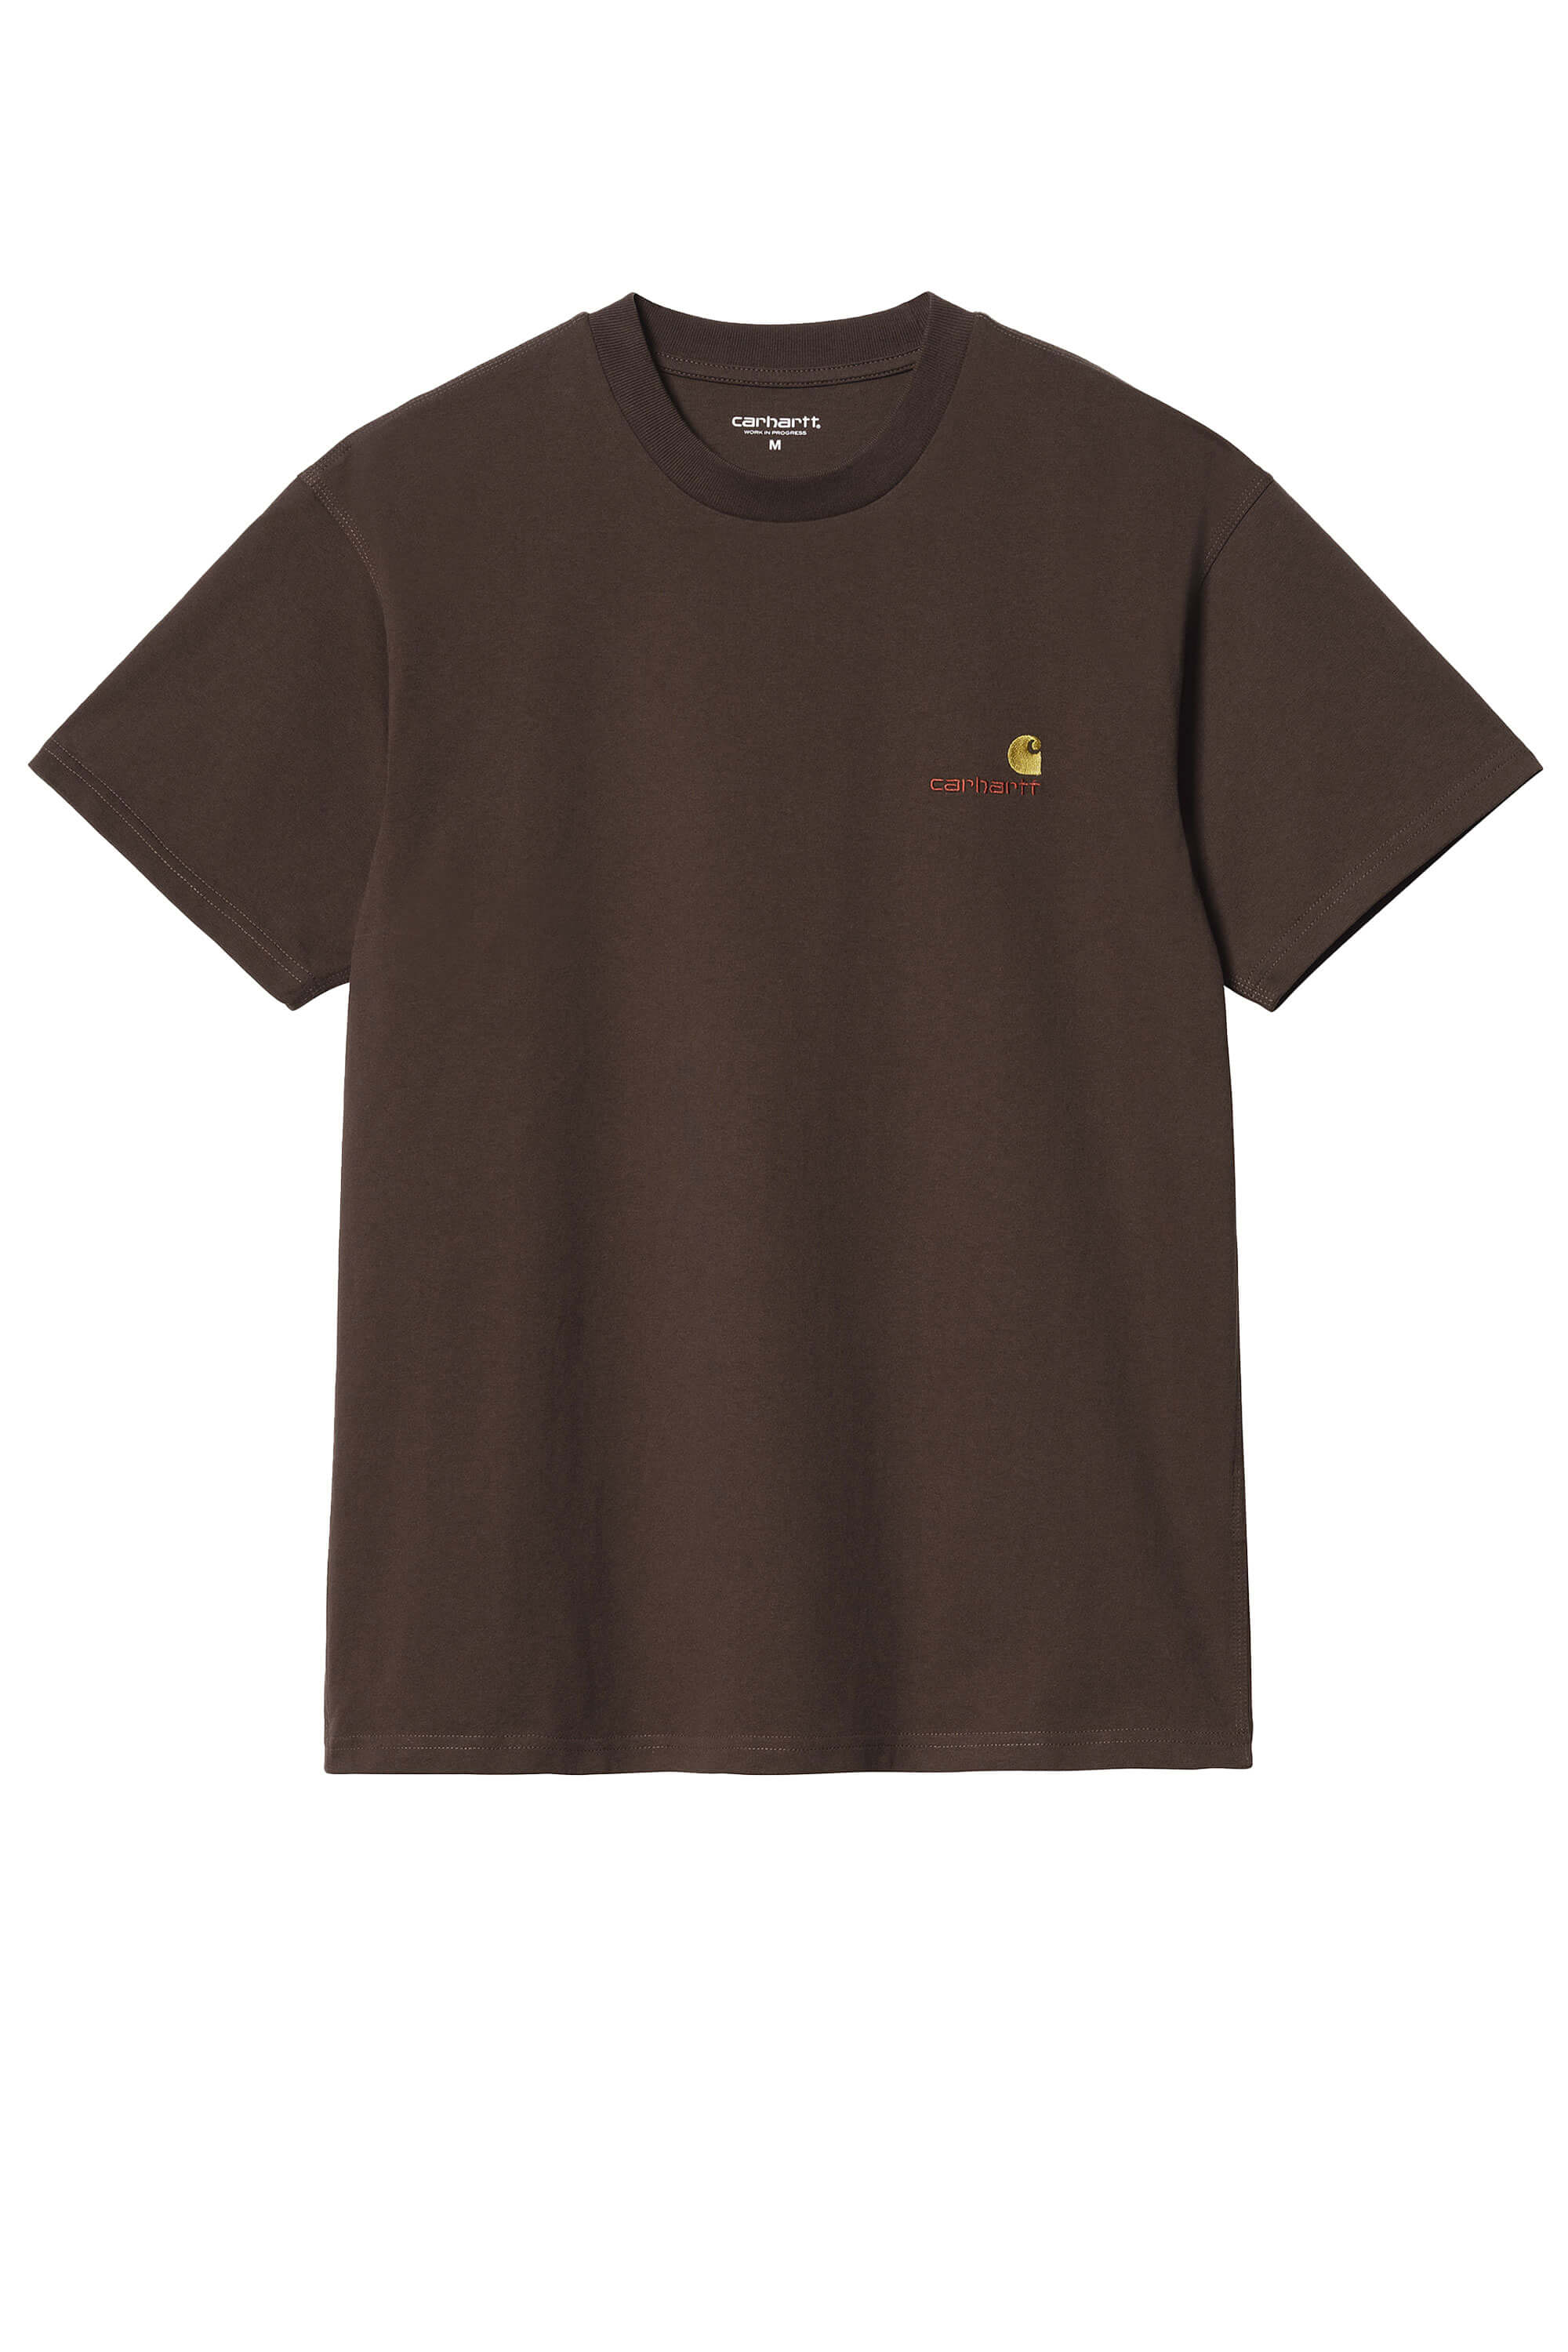 Darck brown cotton embroidered T-shirt